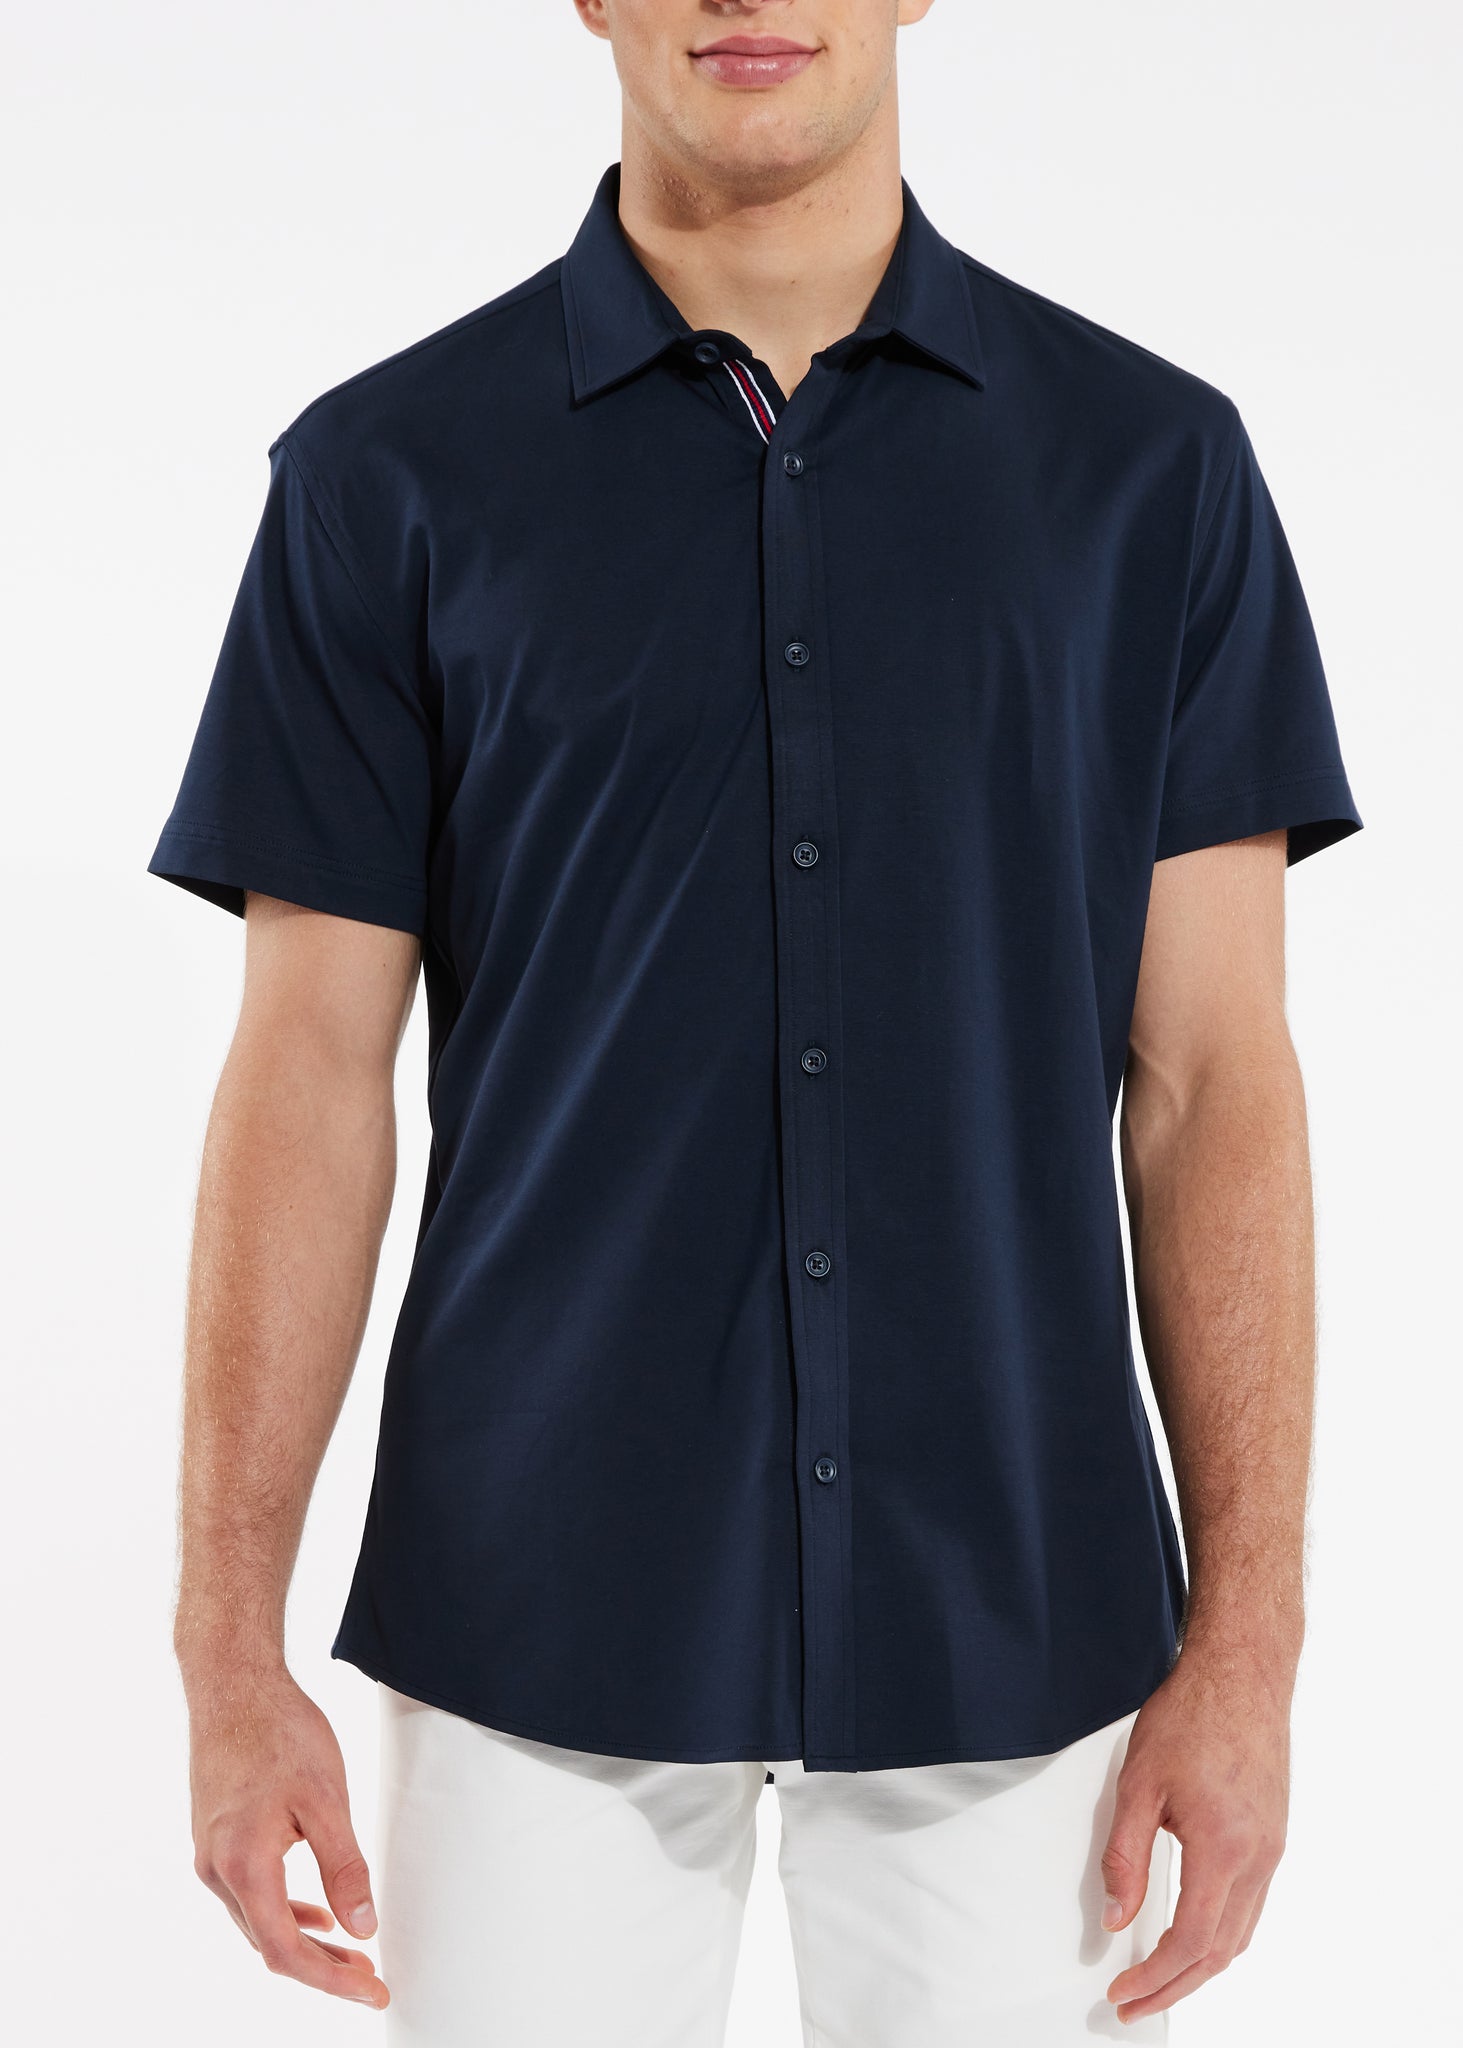 Solid Knit Stretch Shirt w/ Tape Detail Navy